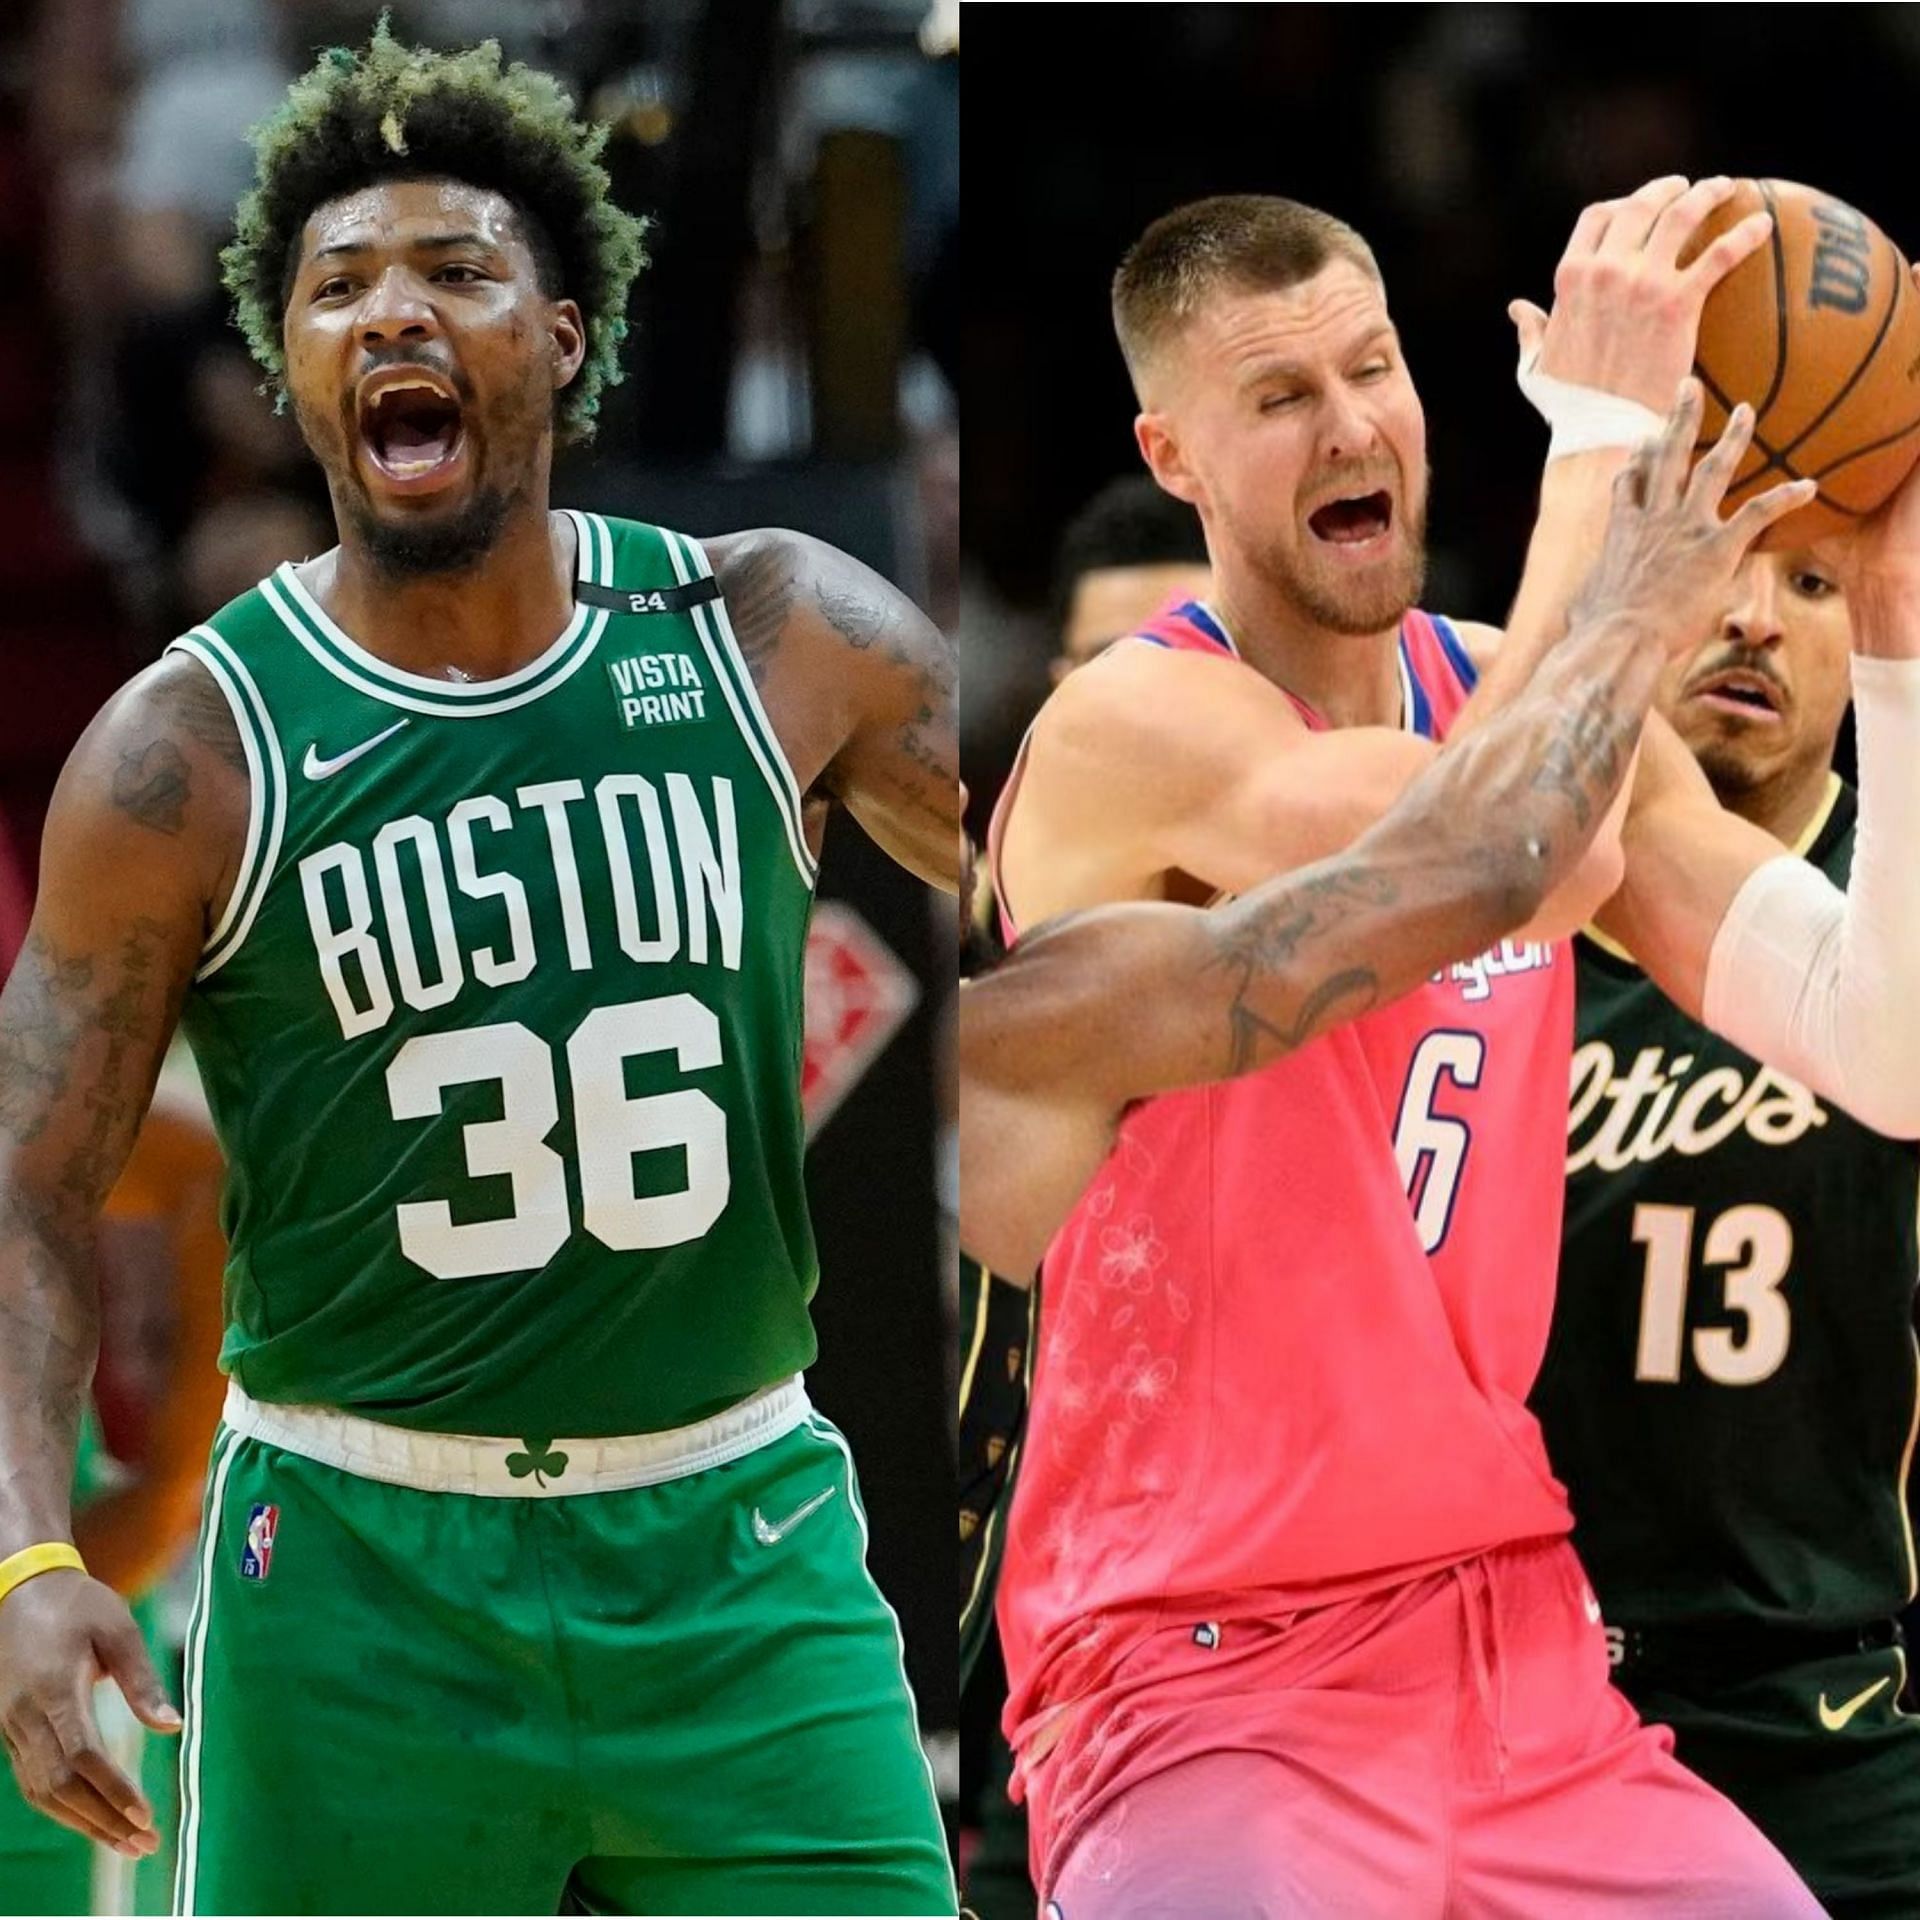 And your 2022 NBA Defensive Player of the Year is Marcus Smart!